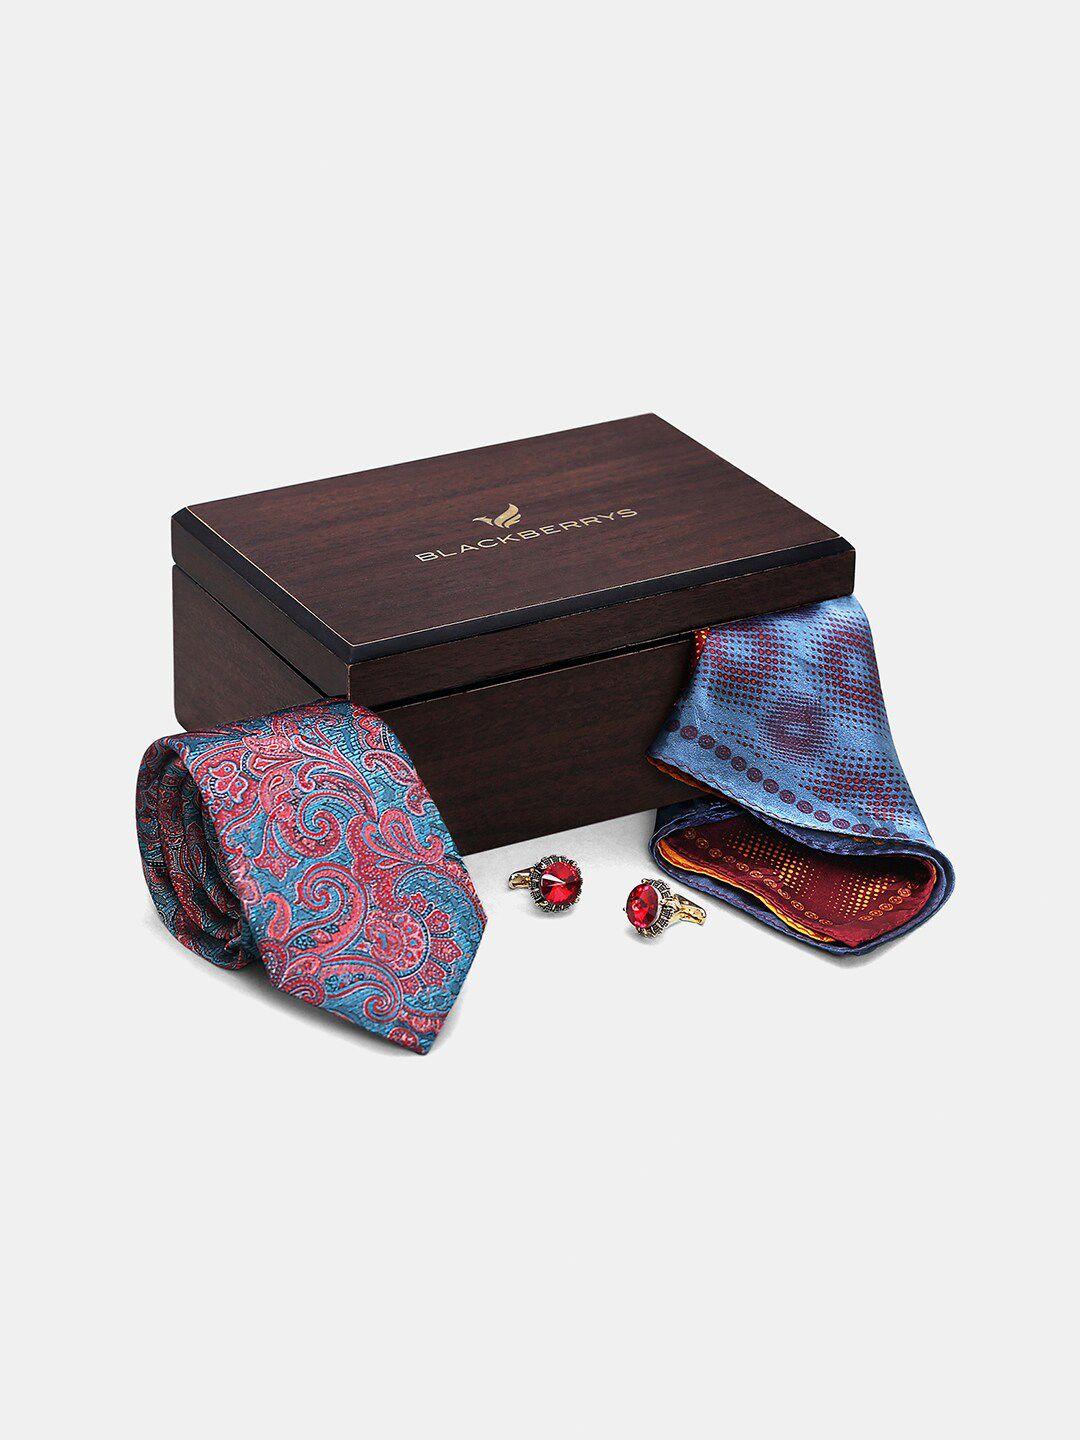 blackberrys men printed silk tie with pocket square and cufflink formal accessory gift set